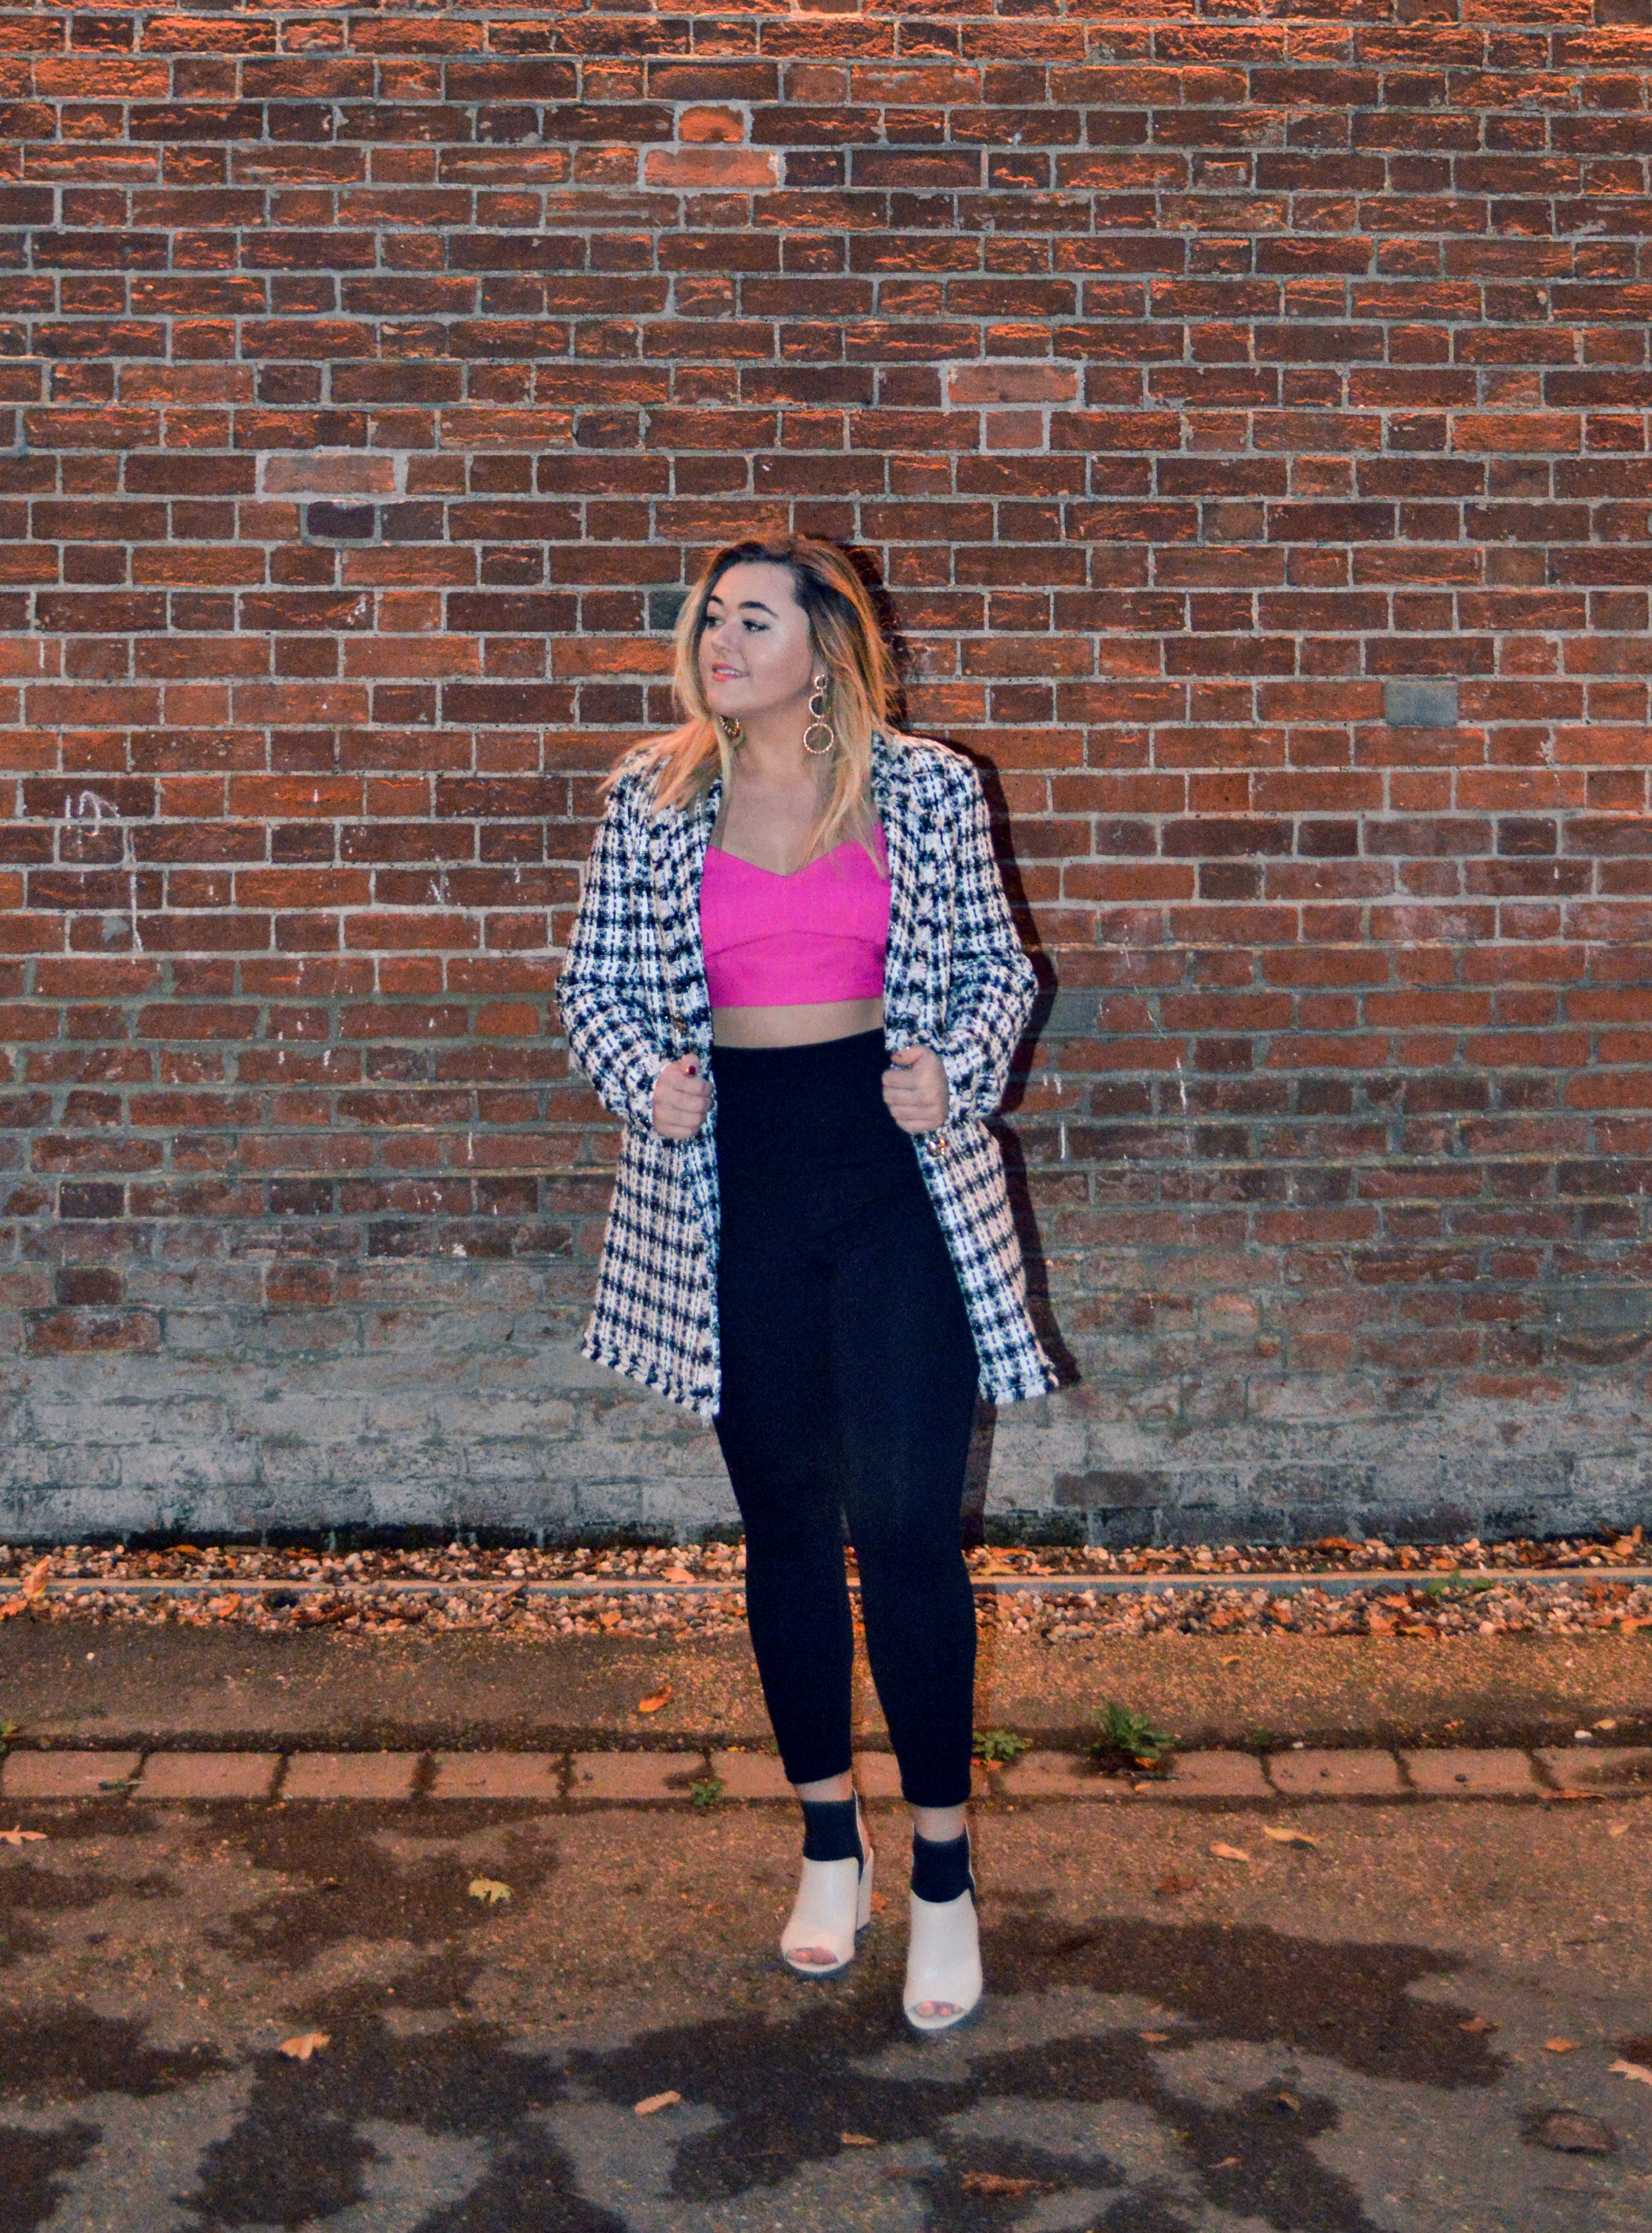 Hannah wears a fuschia pink bralet top with black leggins and black and white check bouclé jacket by River Island